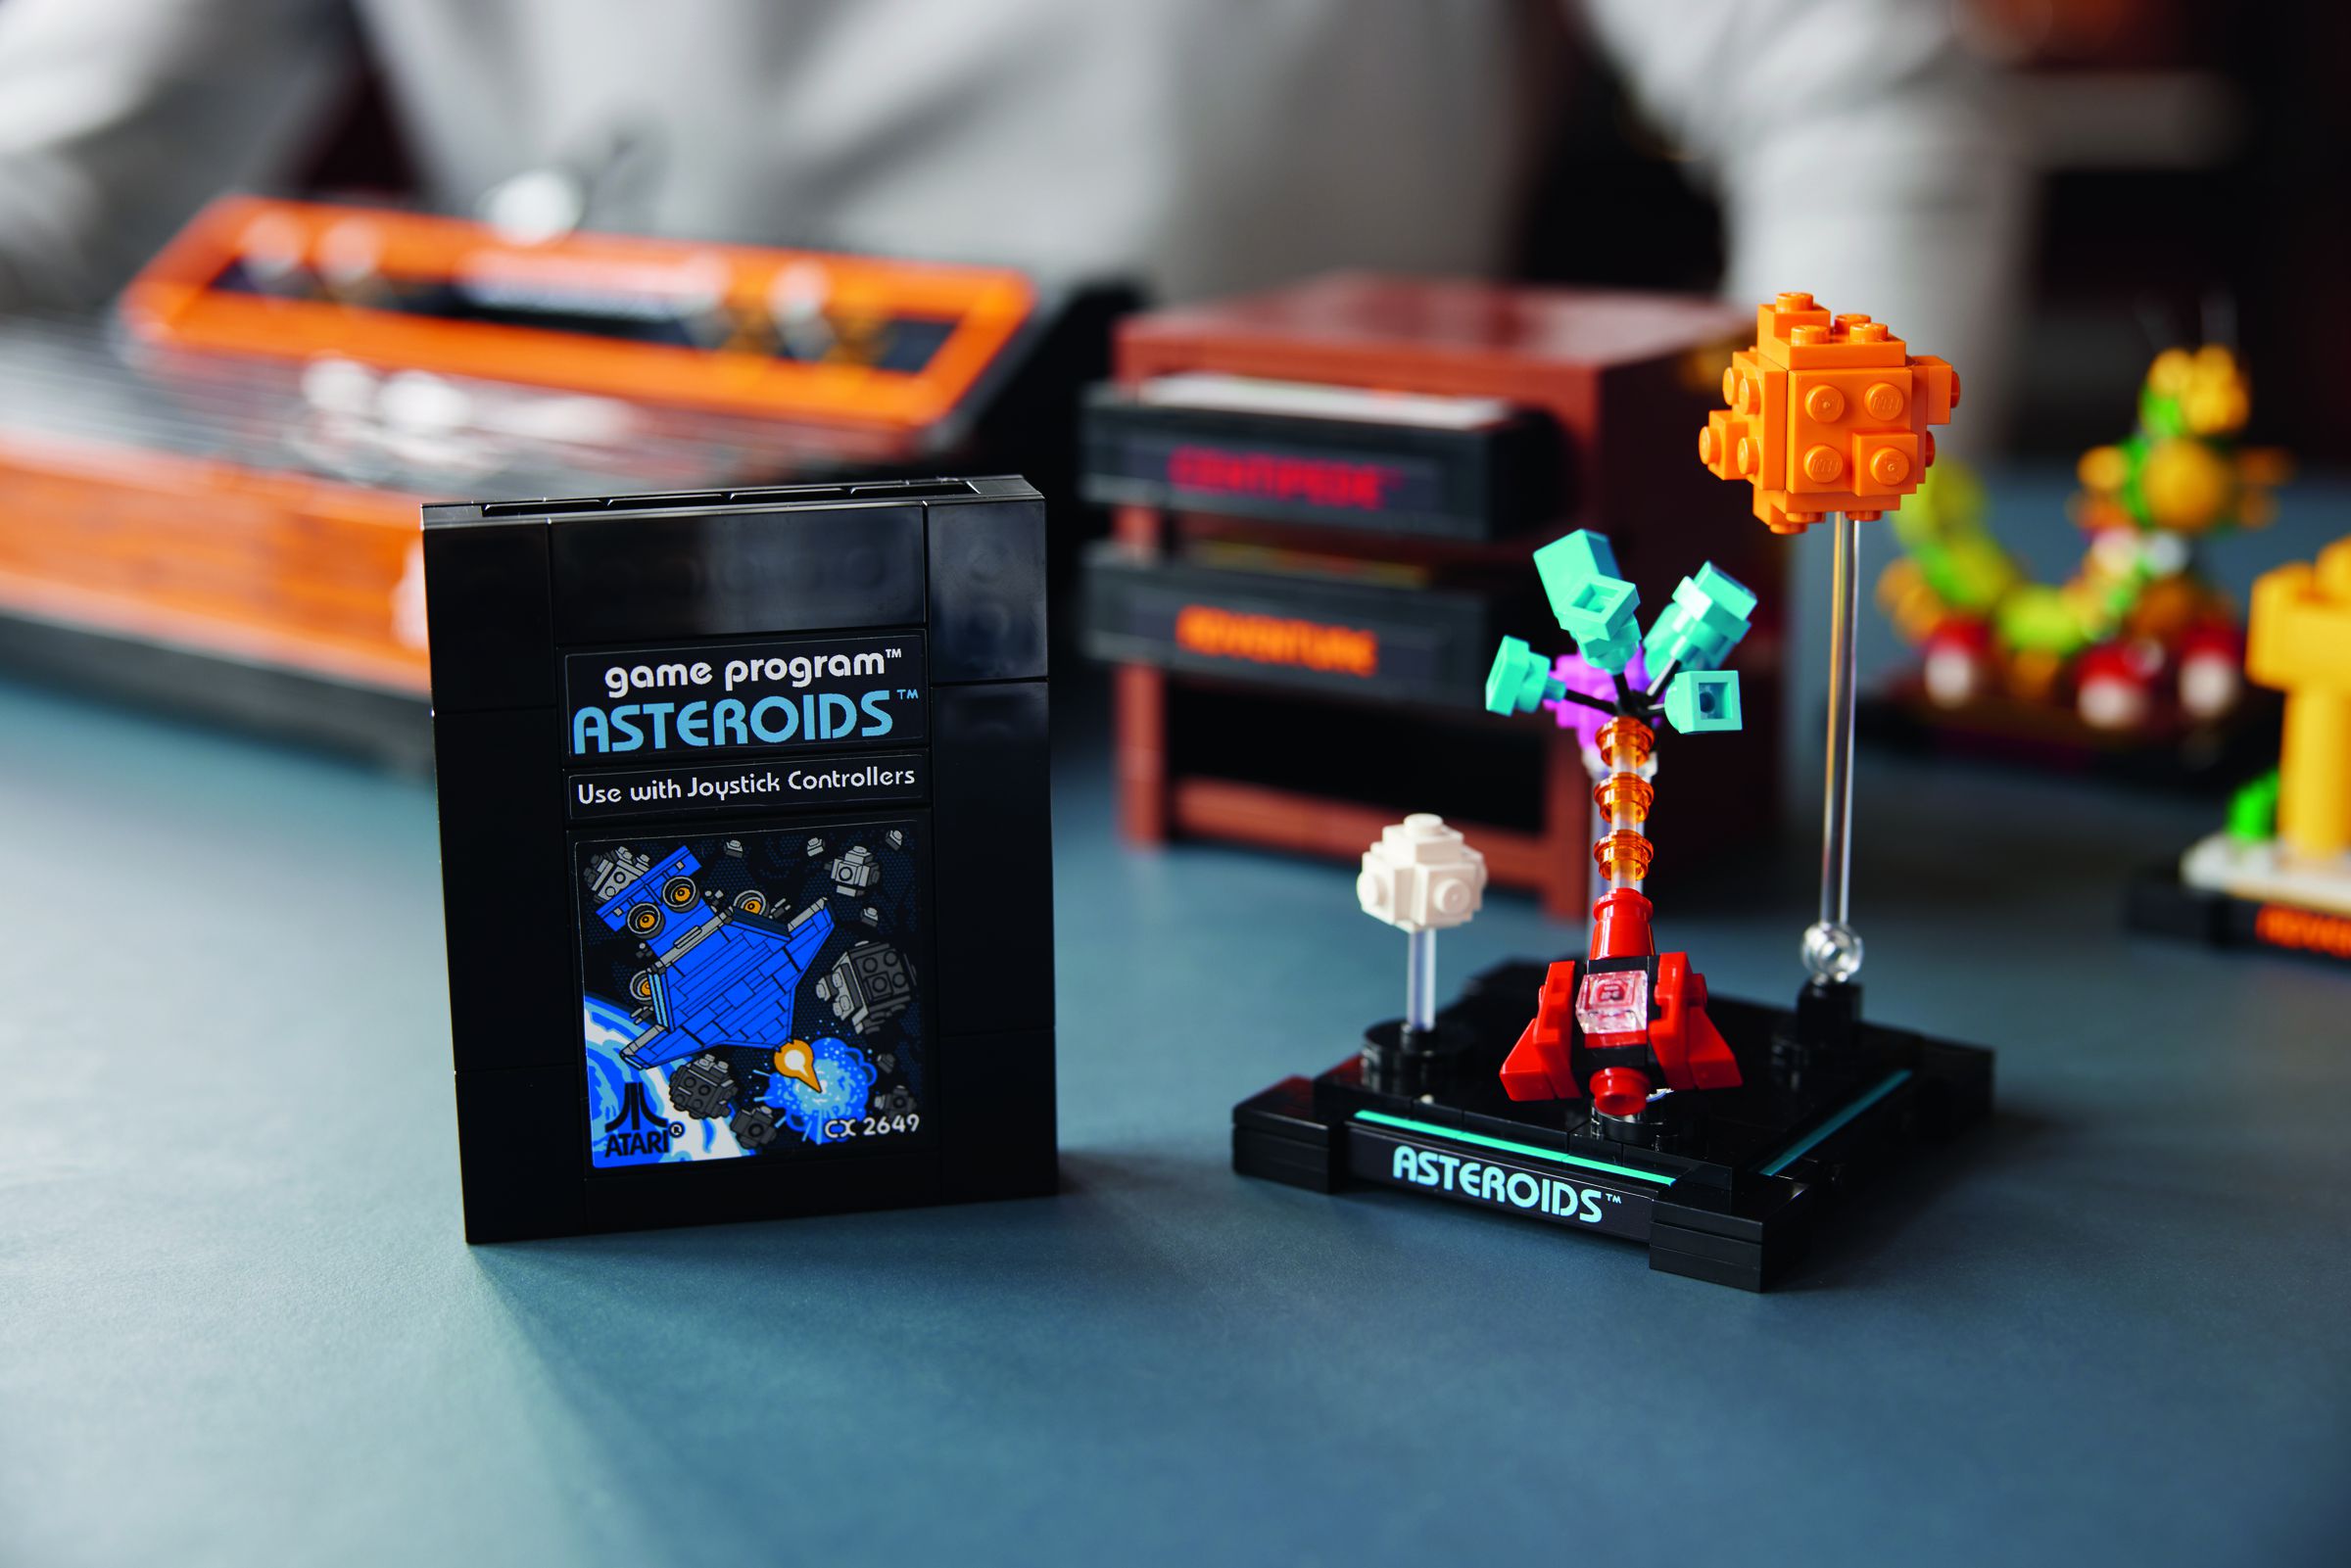 Asteroids is one of three game cartridges included with the set.